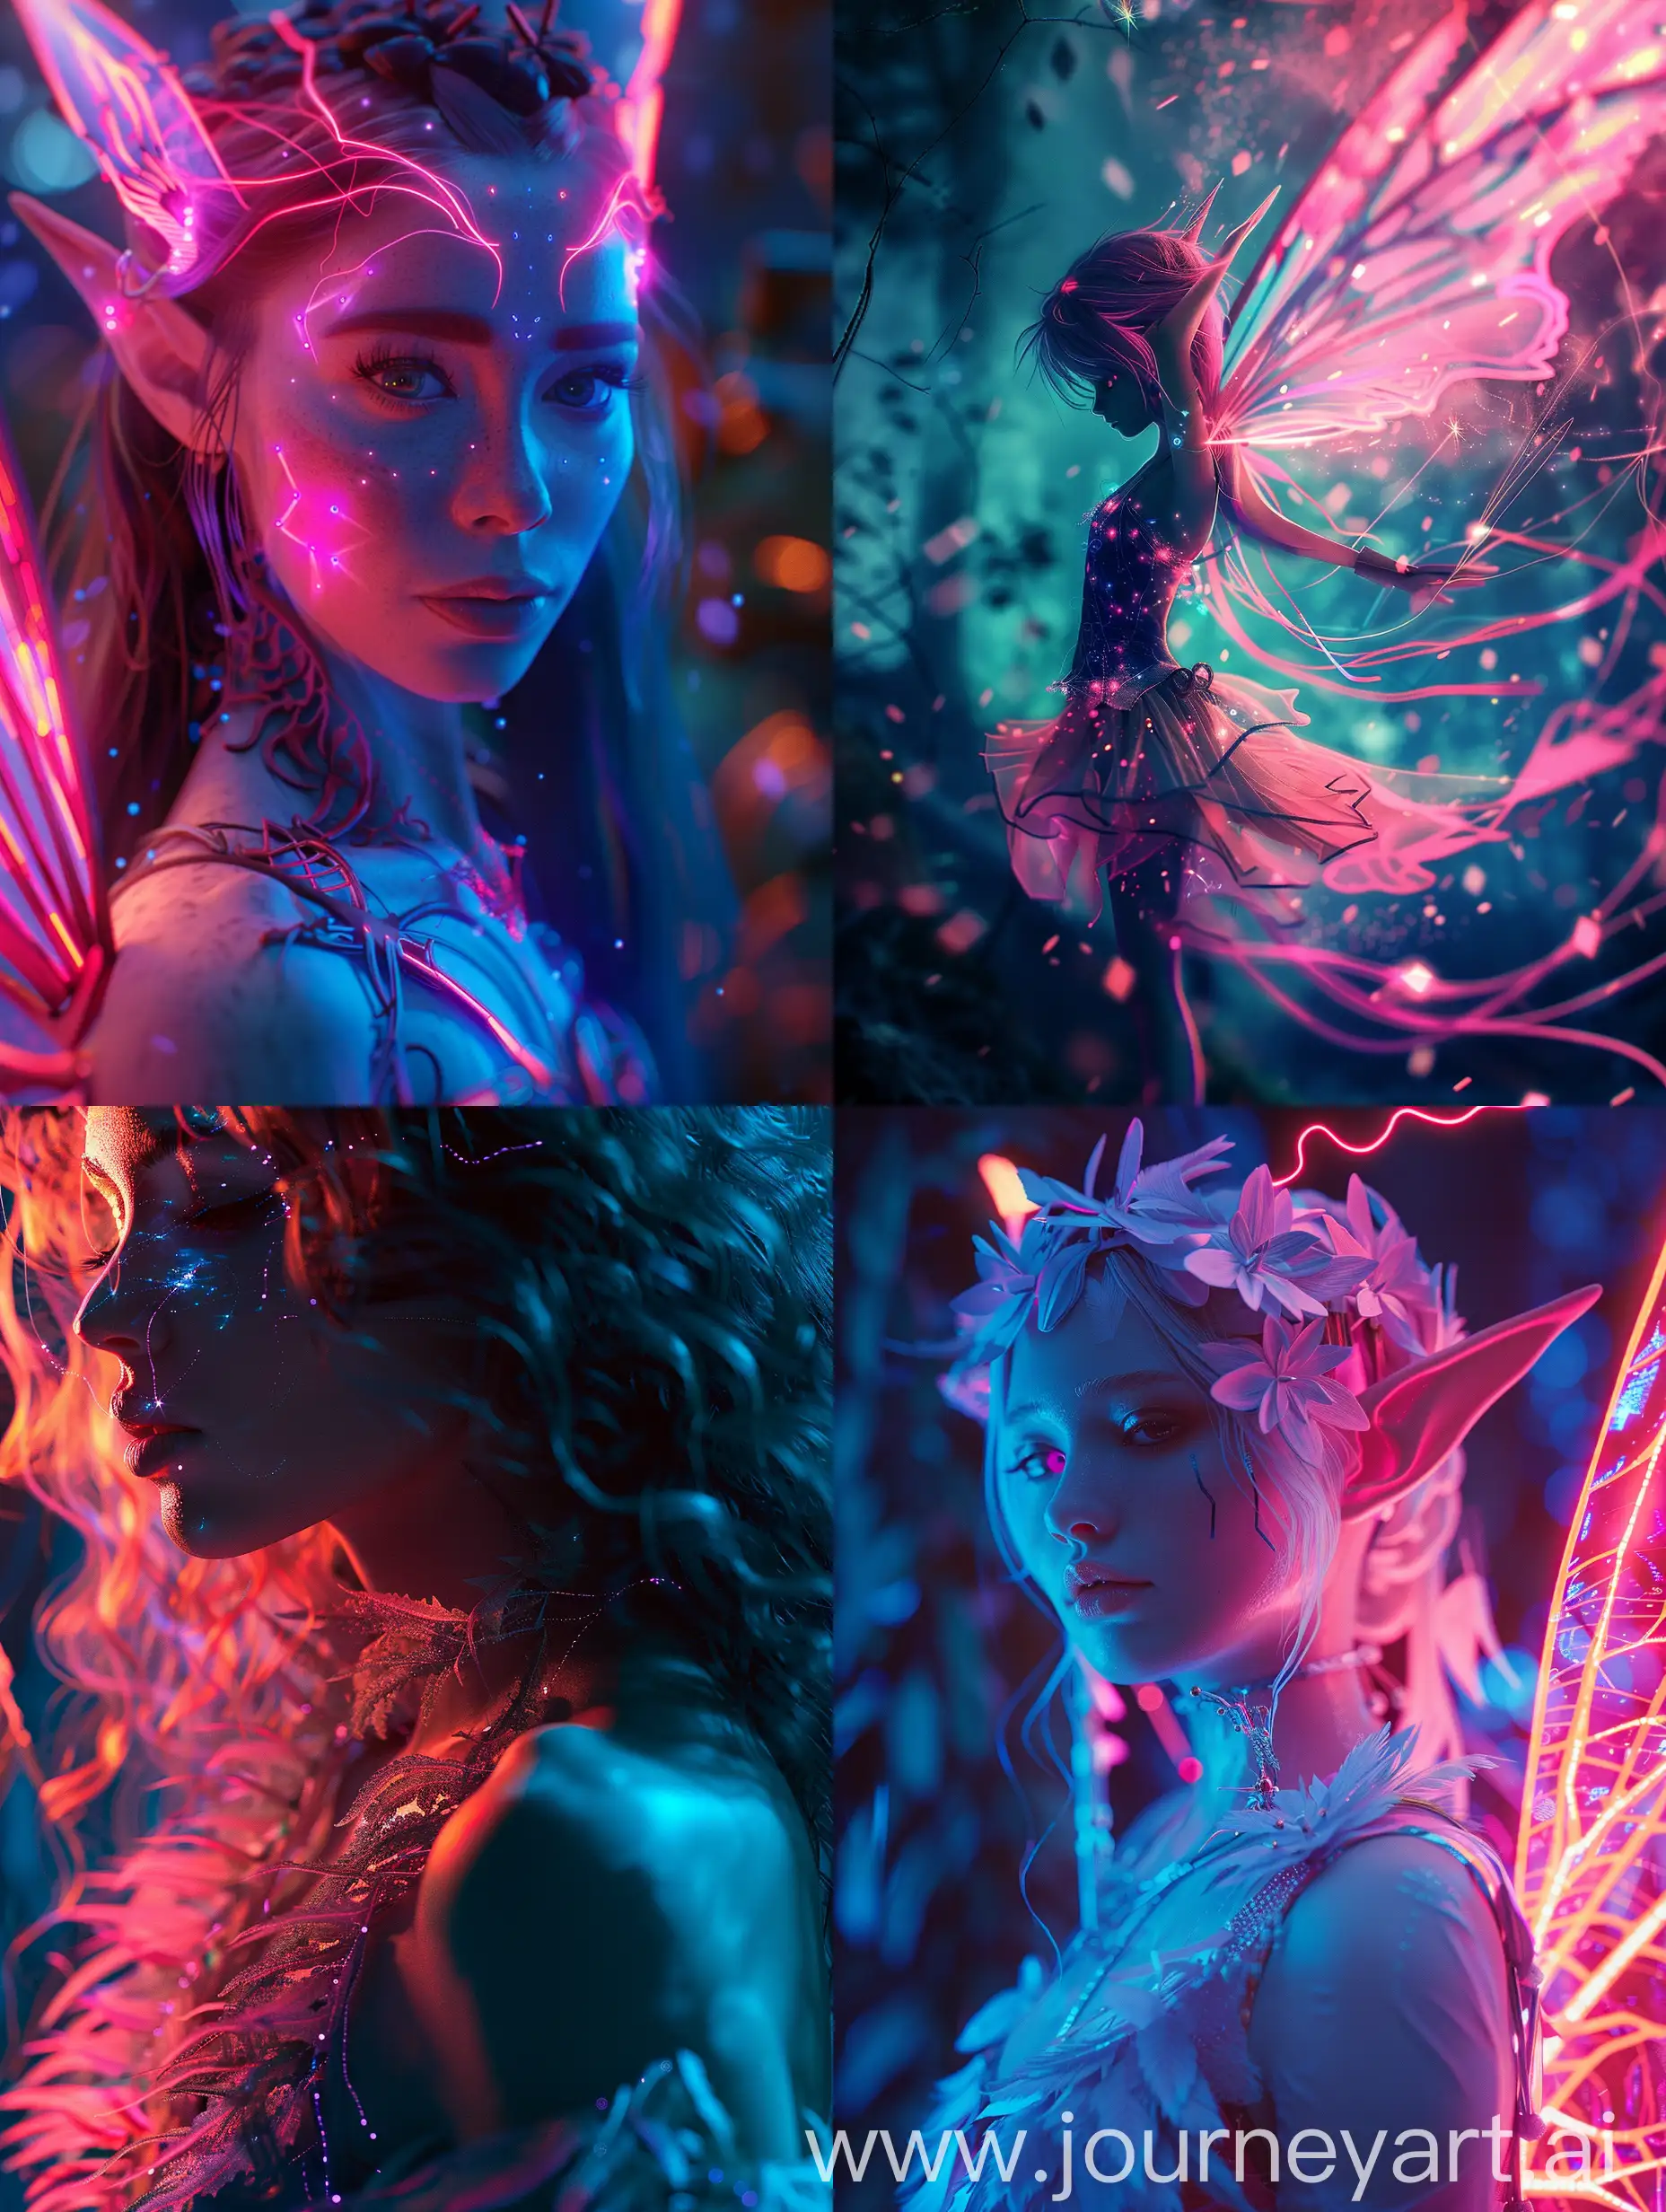 Elf, beautiful, darkness, close up potrait, half body, realistic, high detailed, with subtle pink and blue gradients, robotic lasers fairy dancing rave in an neon incandescent flame, Moonlight enveloping attire forest.